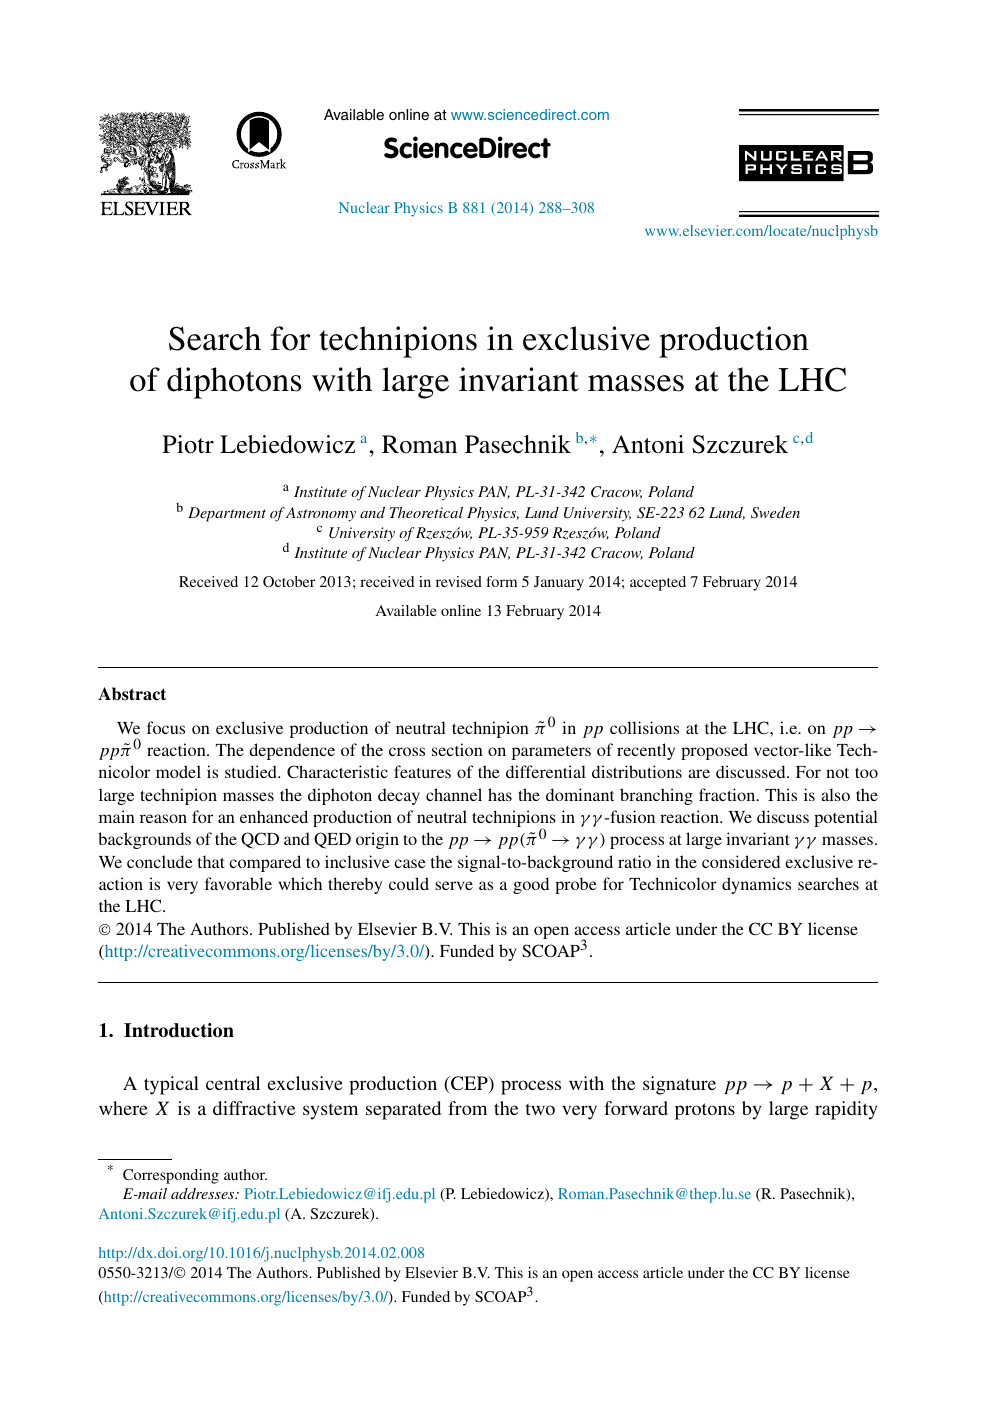 Search For Technipions In Exclusive Production Of Diphotons With Large Invariant Masses At The Lhc Topic Of Research Paper In Physical Sciences Download Scholarly Article Pdf And Read For Free On